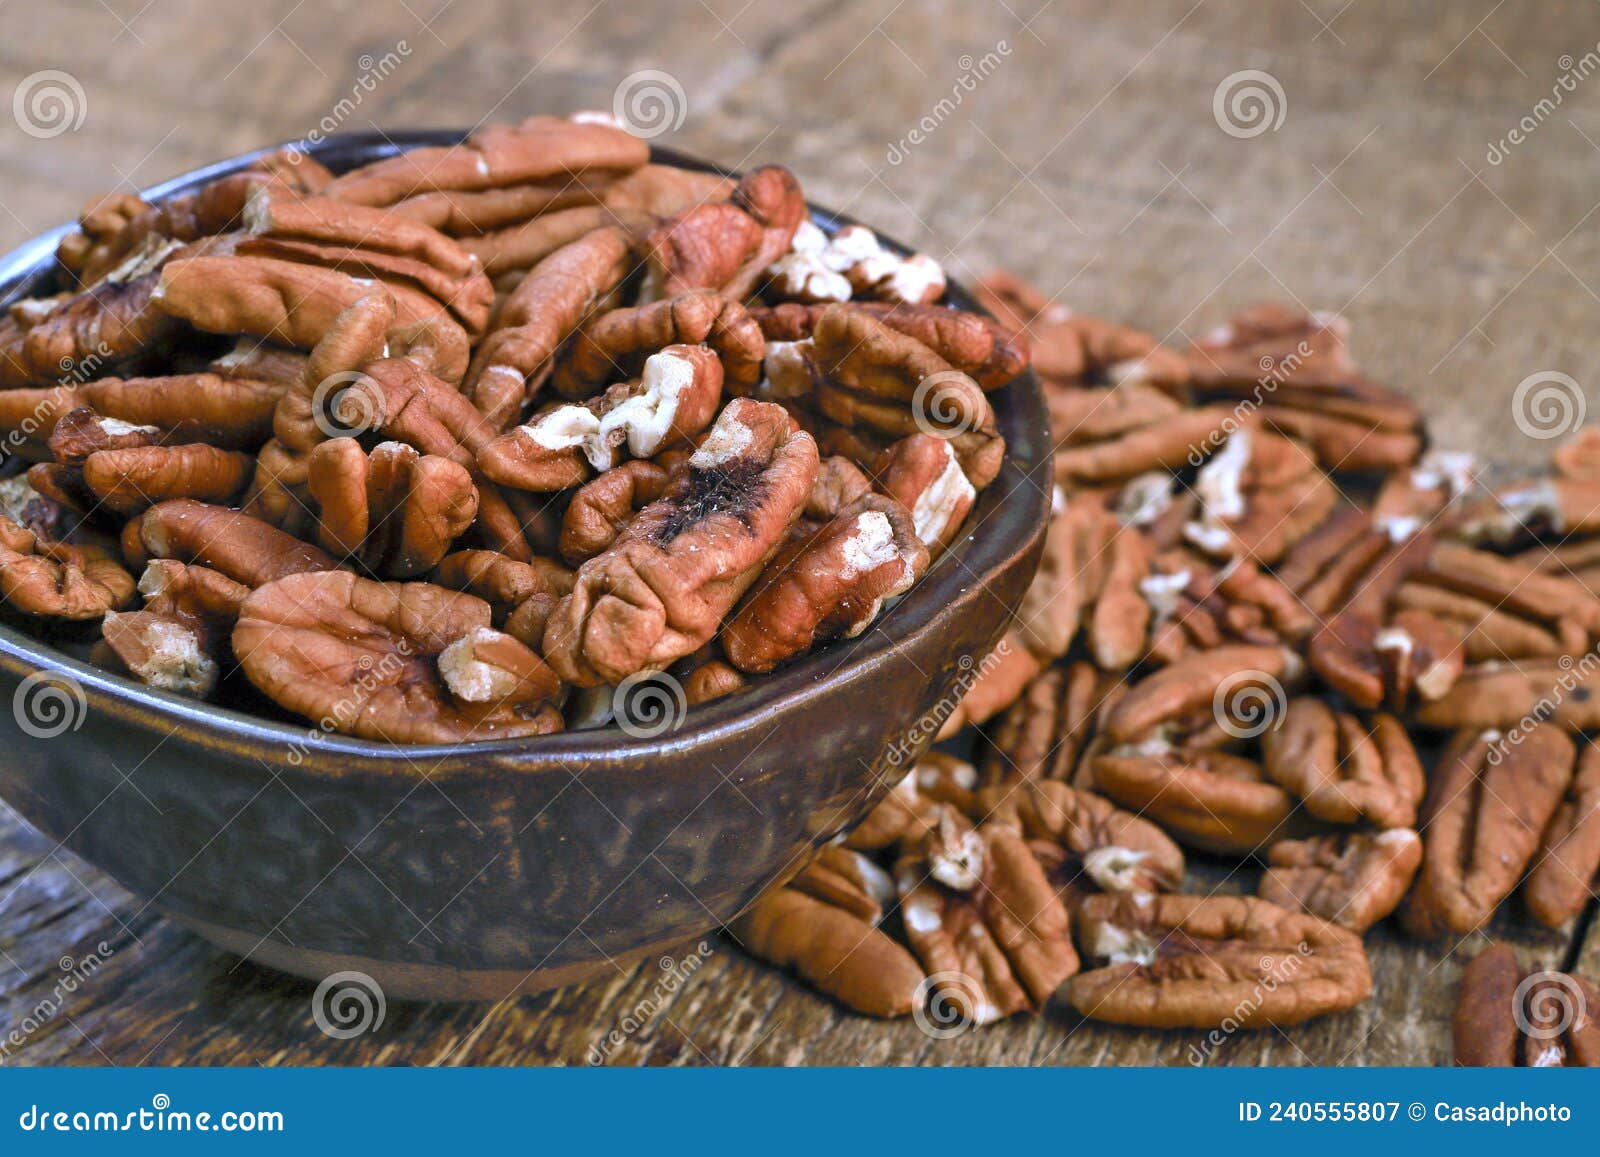 bowl with pecan on rustic wooden table